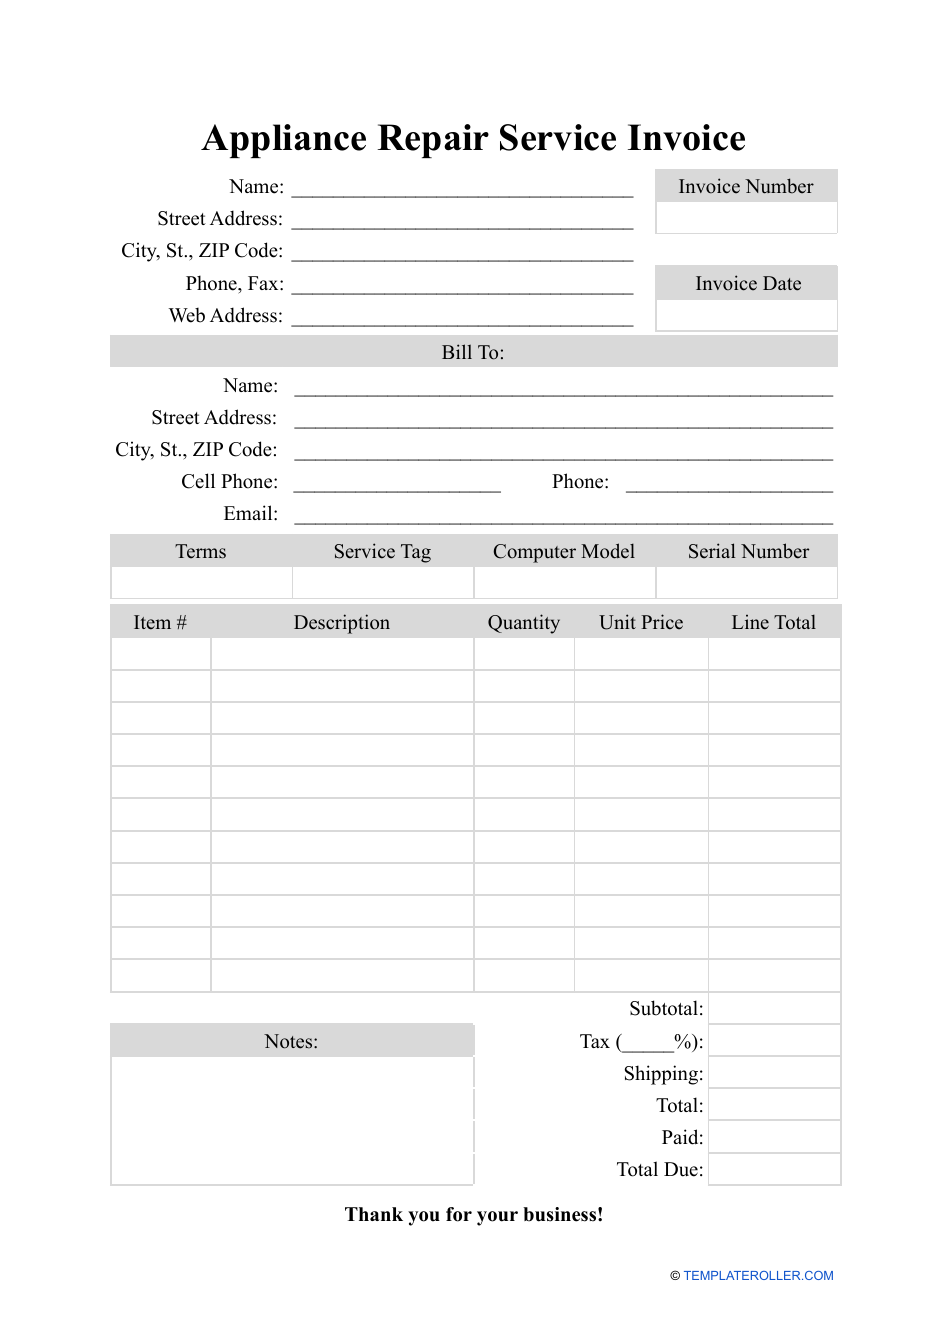 Appliance Repair Service Invoice Template, Page 1